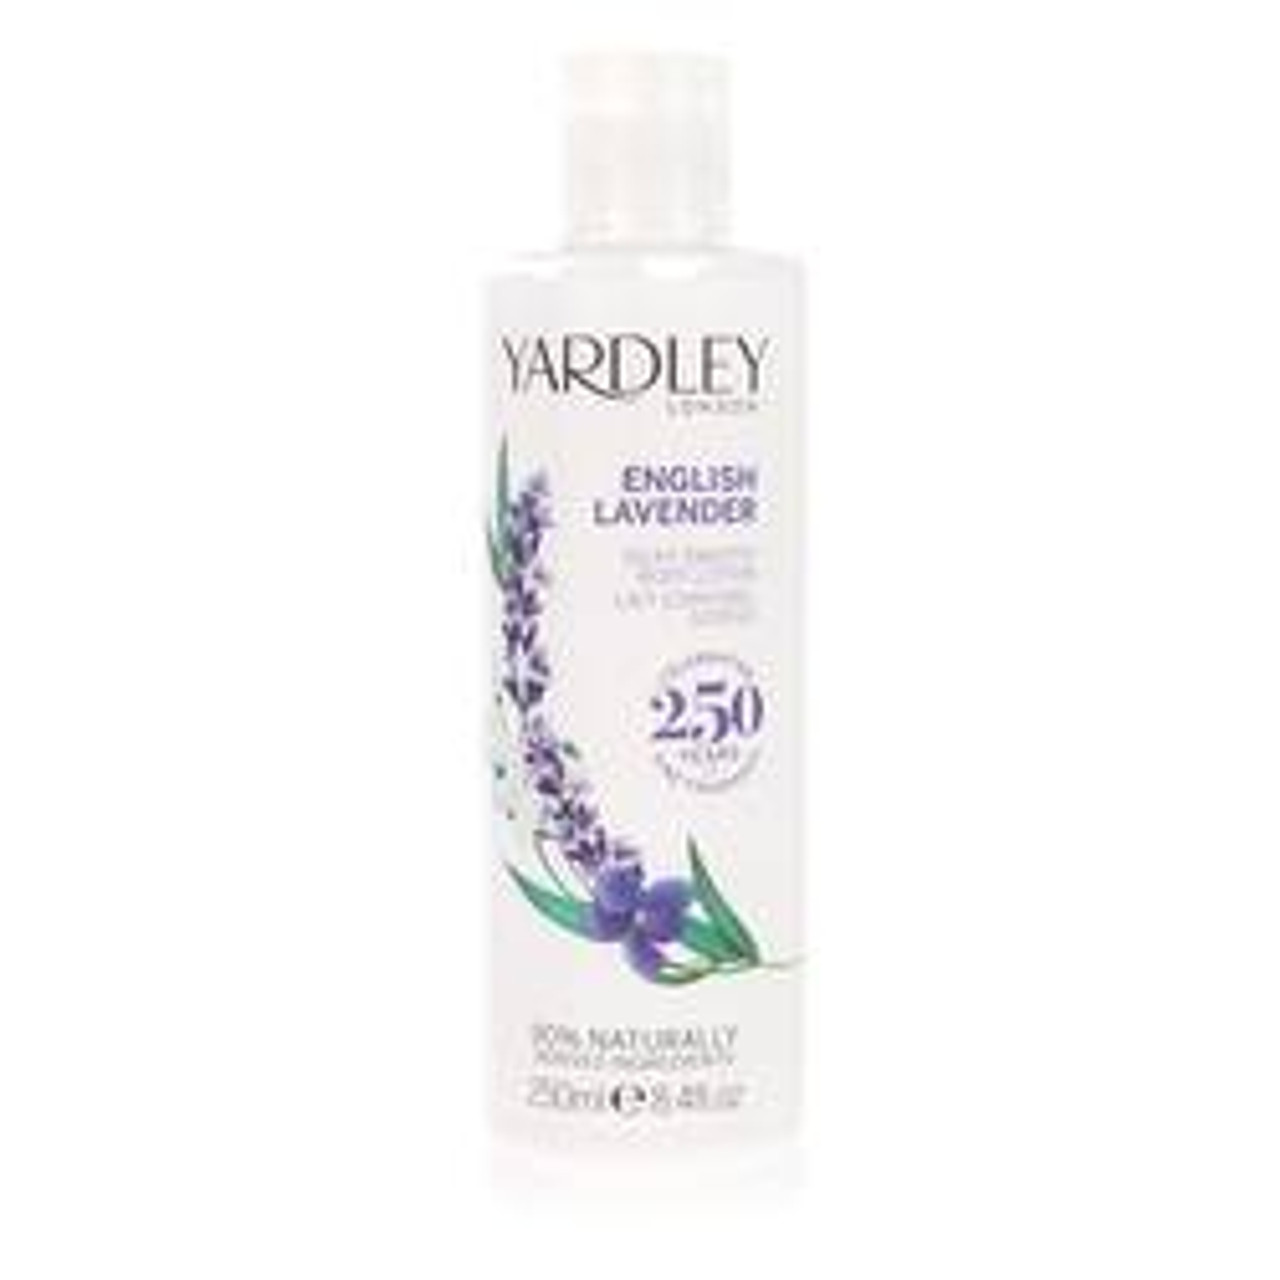 English Lavender Perfume By Yardley London Body Lotion 8.4 oz for Women - [From 39.00 - Choose pk Qty ] - *Ships from Miami